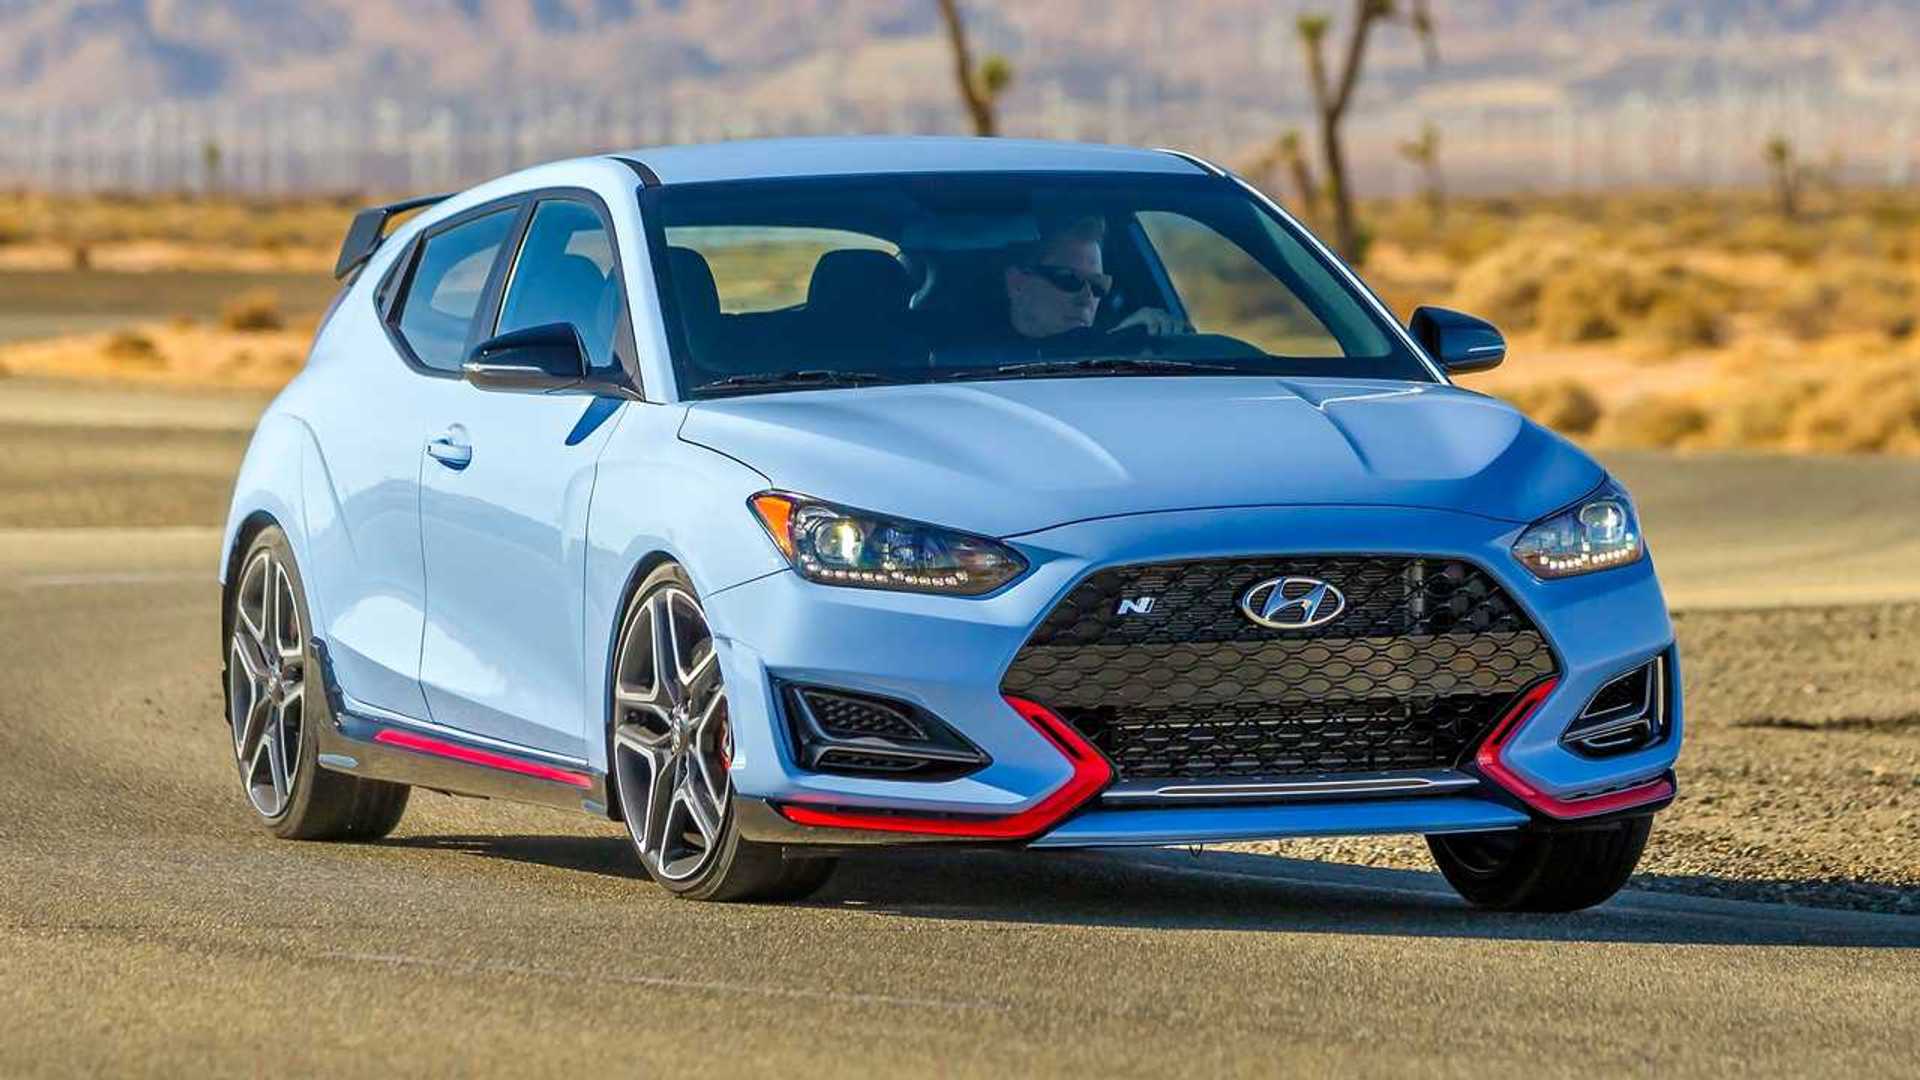 2021 Hyundai Veloster N Features 8-Speed DCT And Improved Cabin